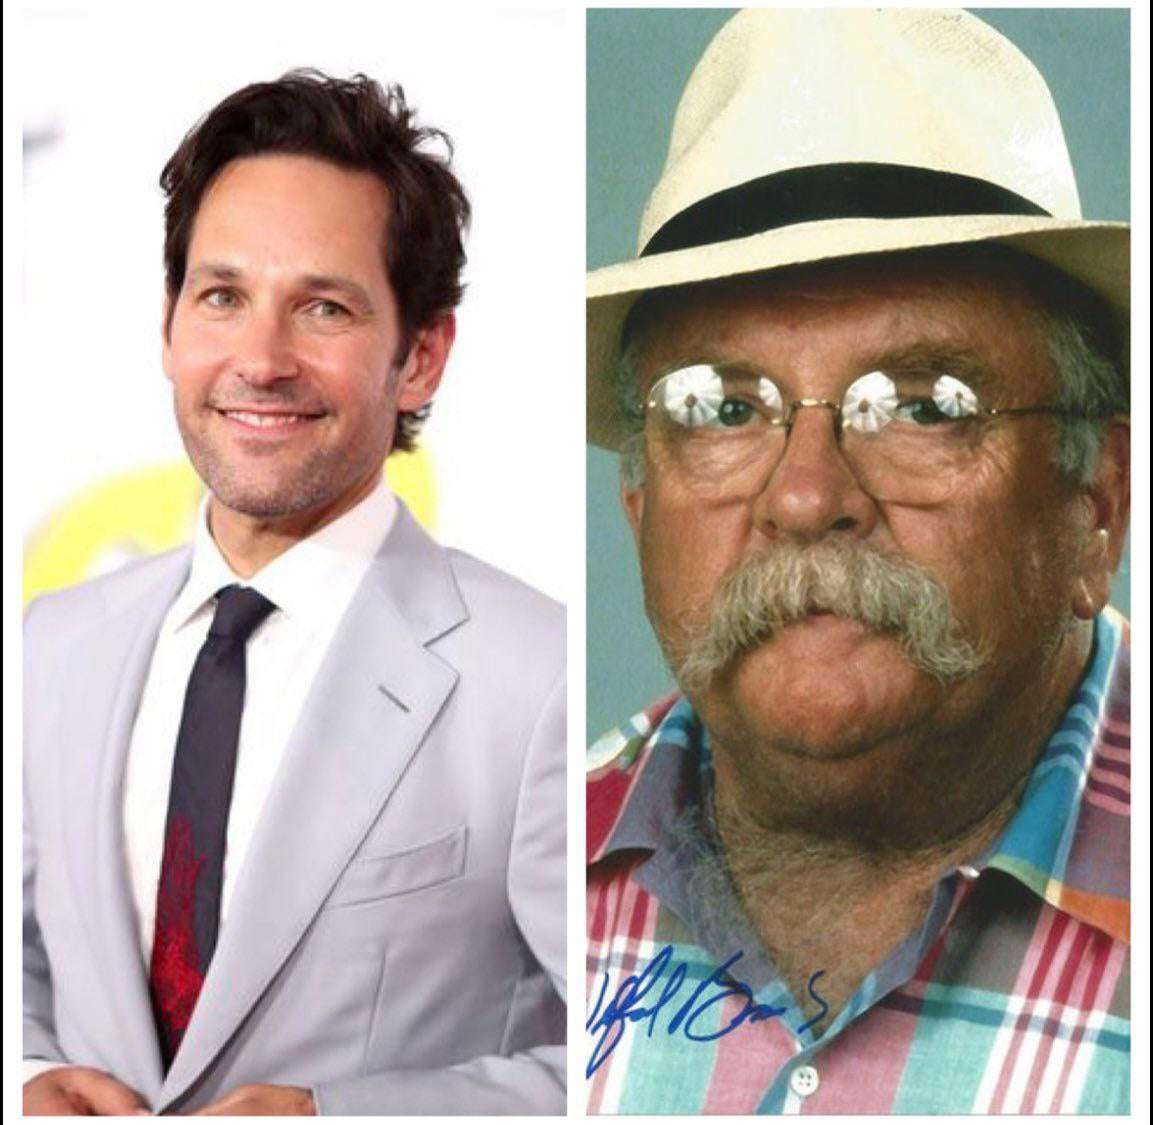 image showing Paul Rudd and Wilford Brimley, each at age 52